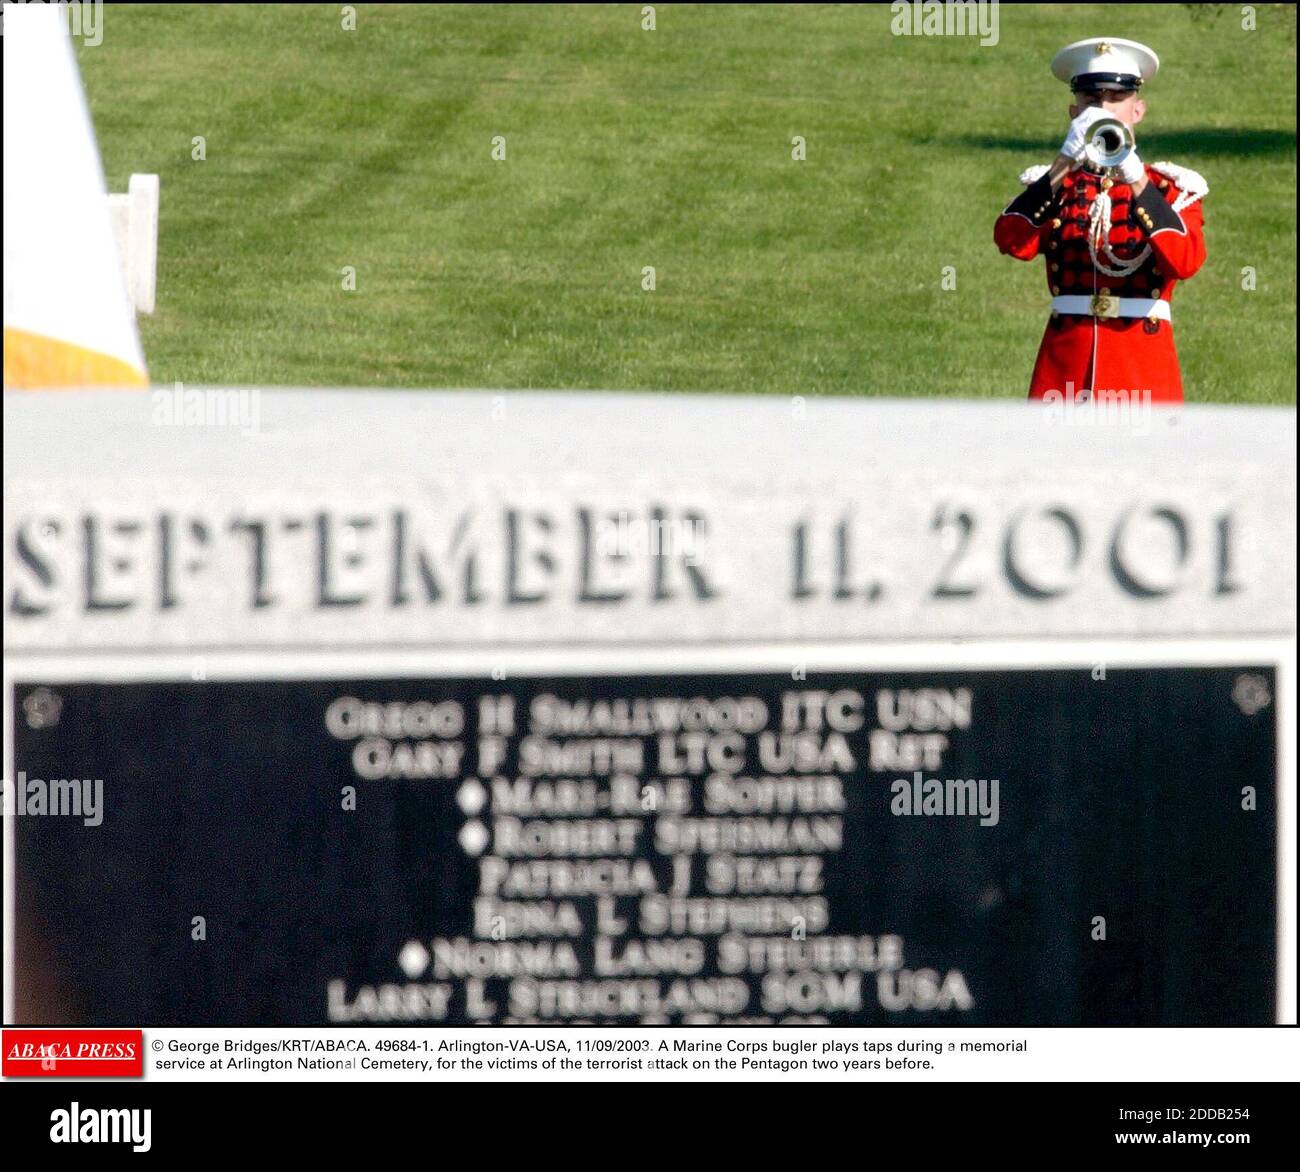 NO FILM, NO VIDEO, NO TV, NO DOCUMENTARY - © George Bridges/KRT/ABACA. 49684-1. Arlington-VA-USA, 11/09/2003. A Marine Corps bugler plays taps during a memorial service at Arlington National Cemetery, for the victims of the terrorist attack on the Pentagon two years before. Stock Photo